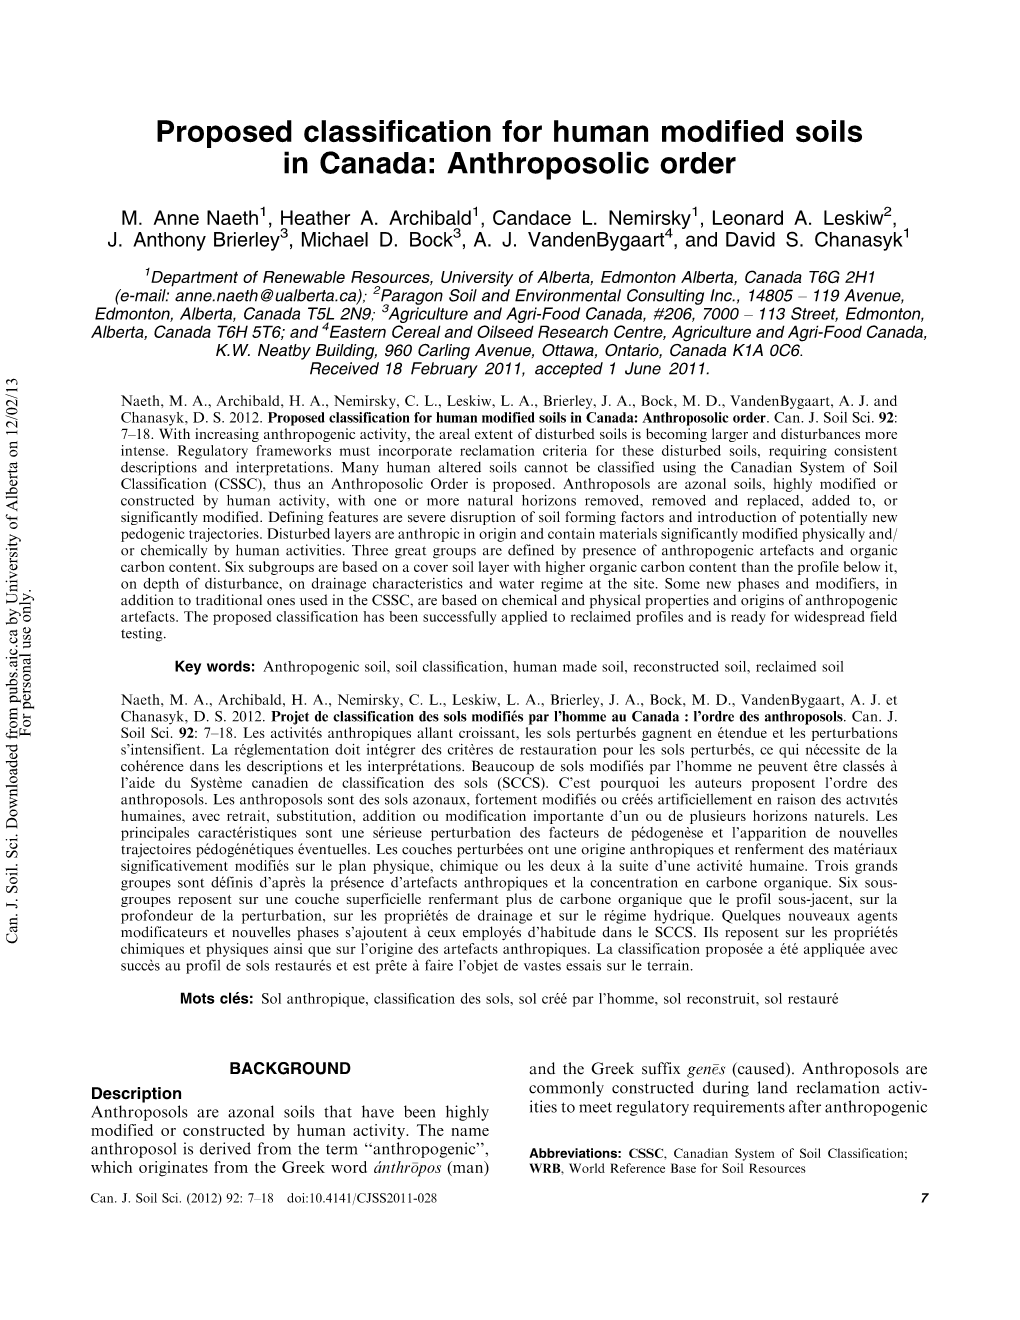 Proposed Classification for Human Modified Soils in Canada: Anthroposolic Order